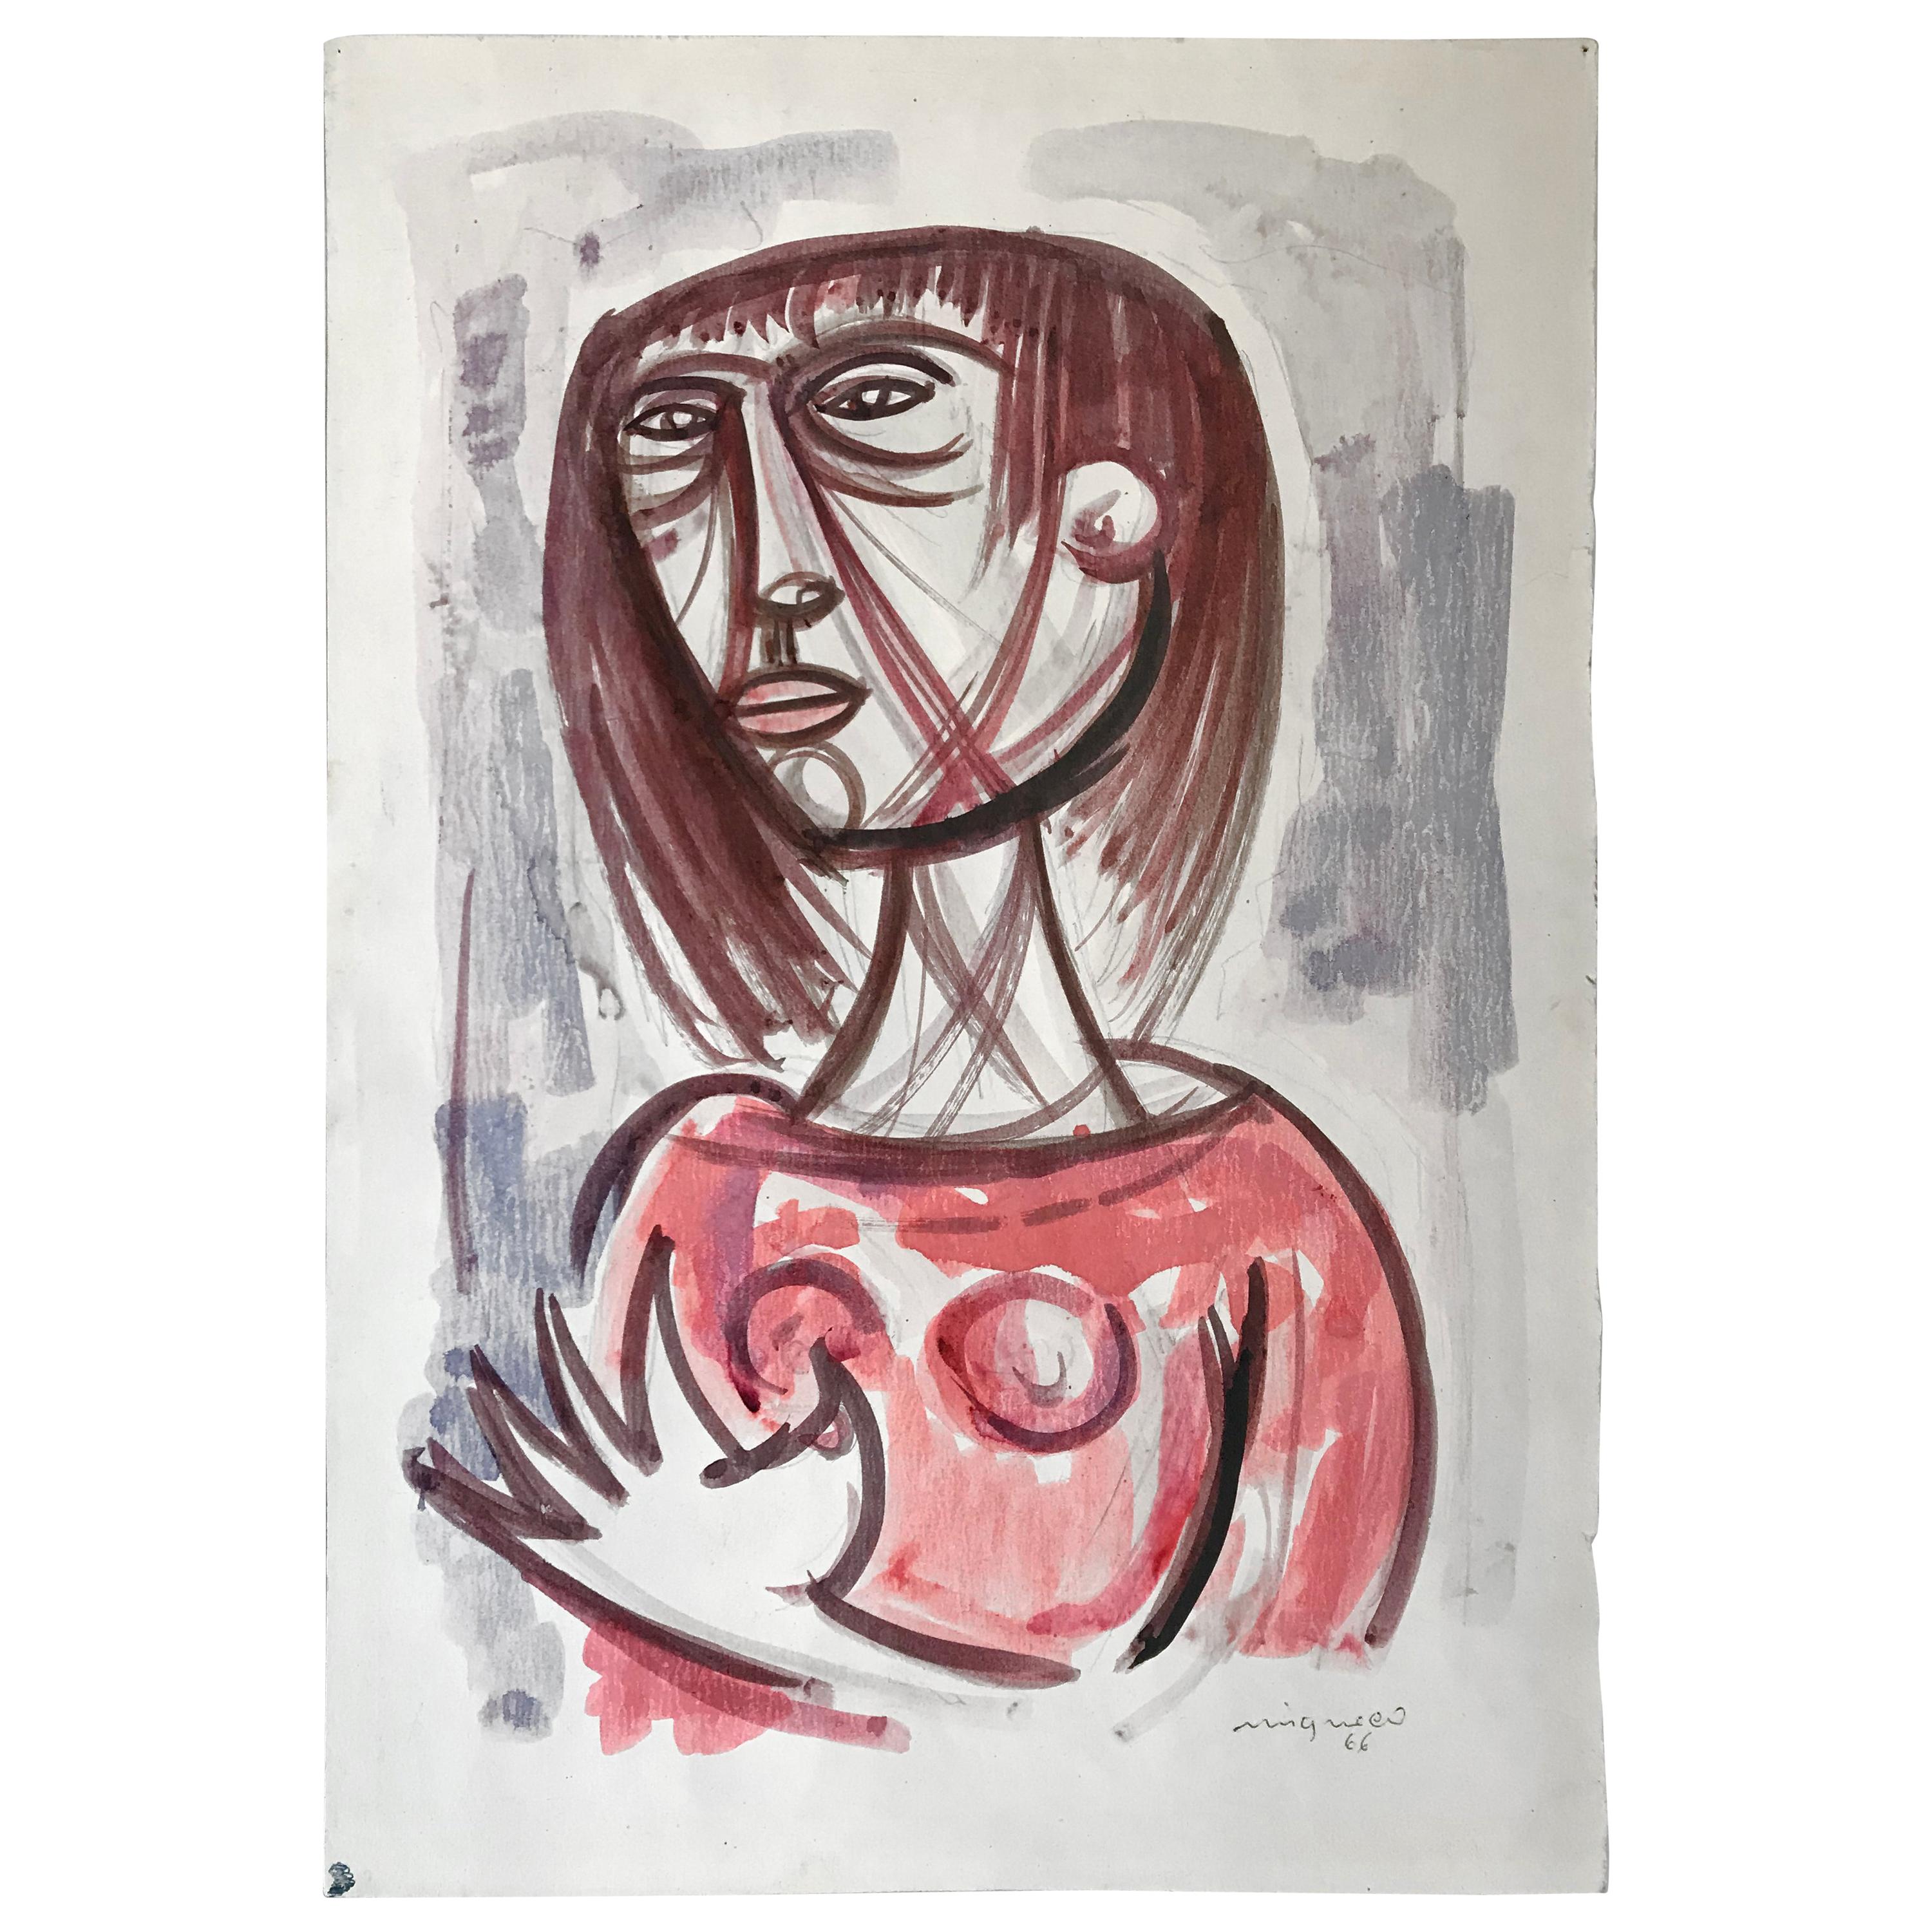 Giuseppe Migneco Italian Midcentury Modern Drawing Watercolor on Paper, 1966